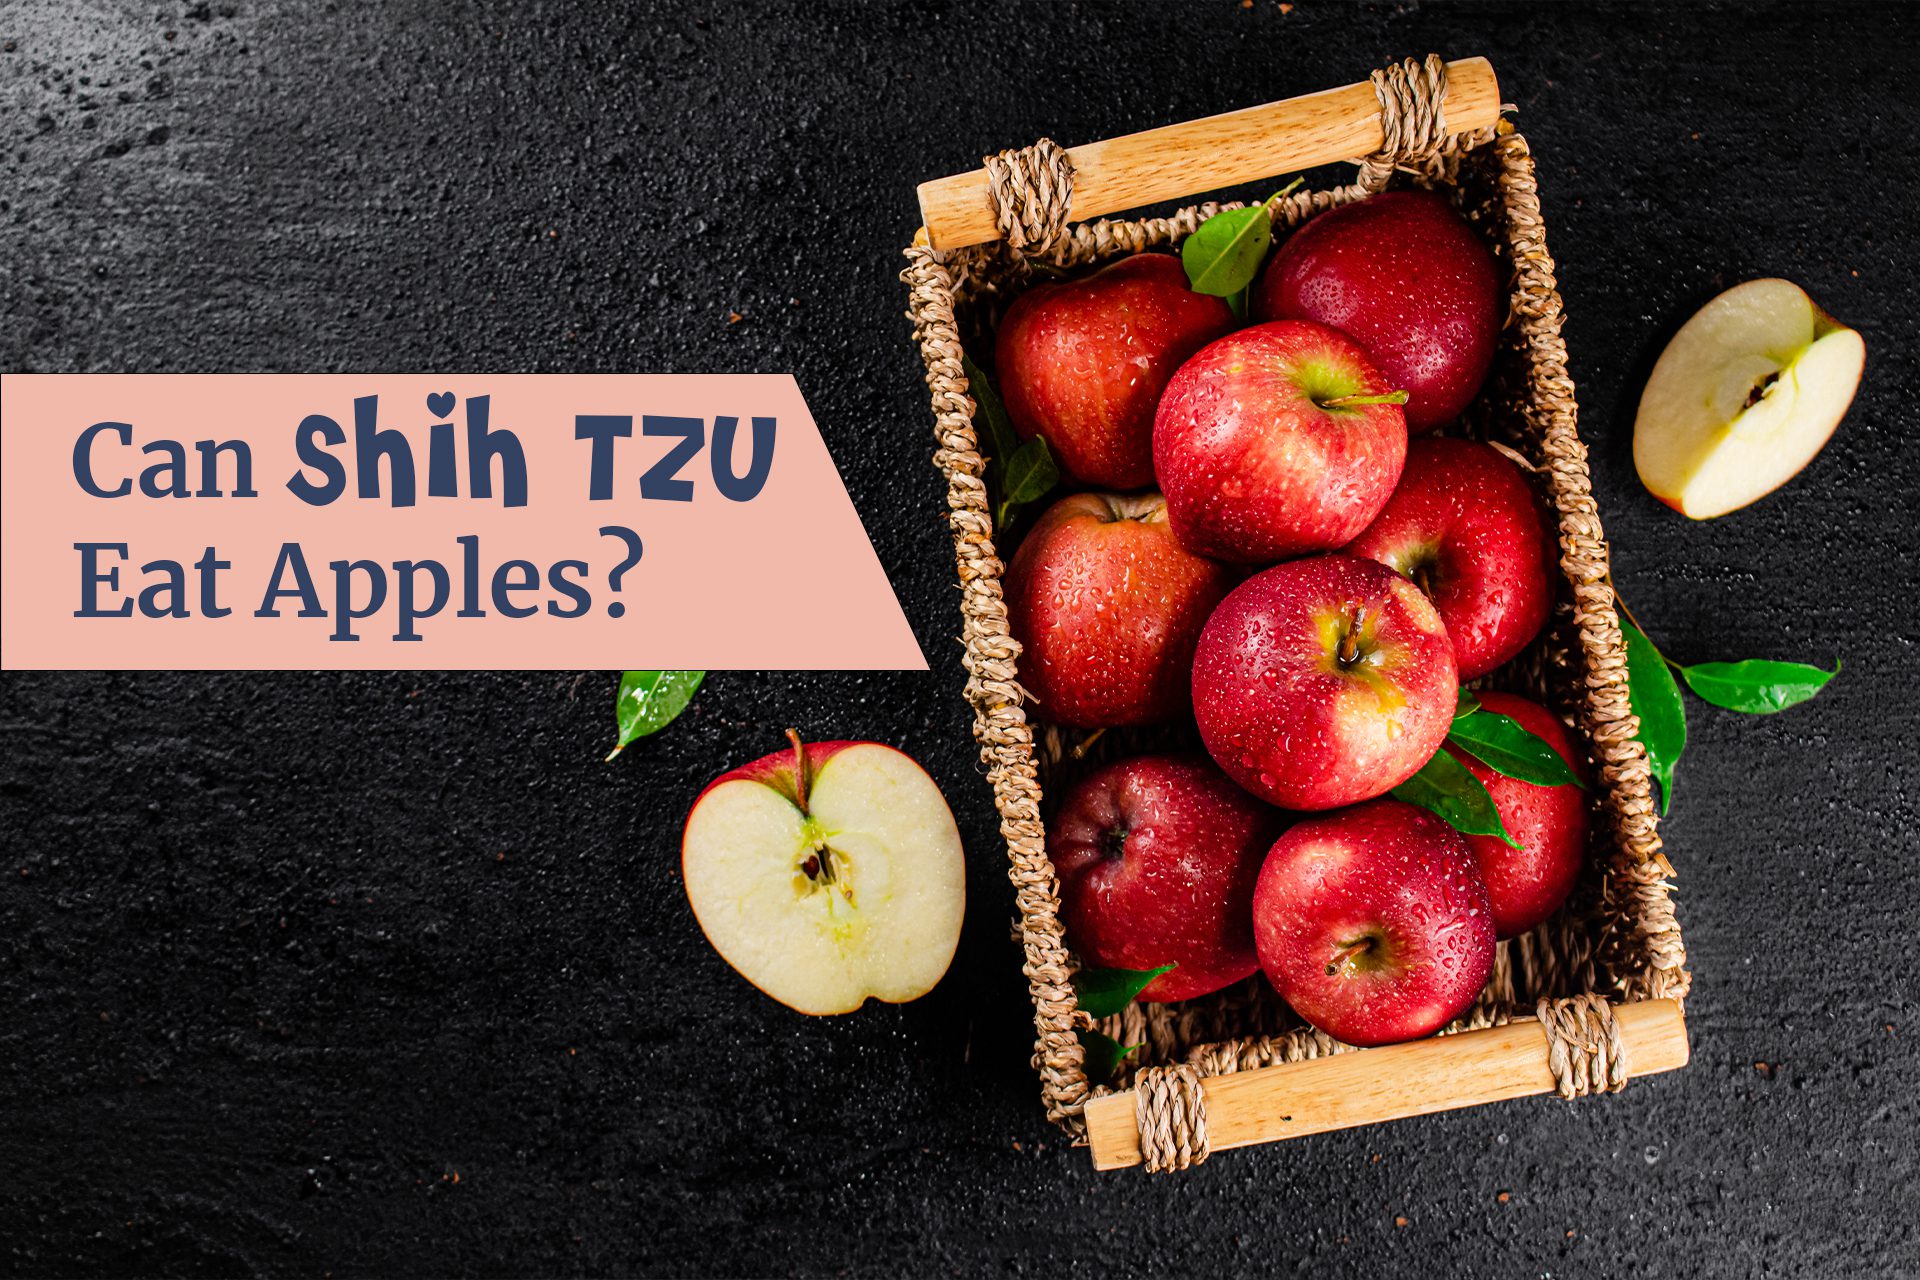 Can Shih Tzu eat apples? The answer to this question is a resounding "yes!" However, there are some things that you need to consider before feeding your Shih Tzu apples.